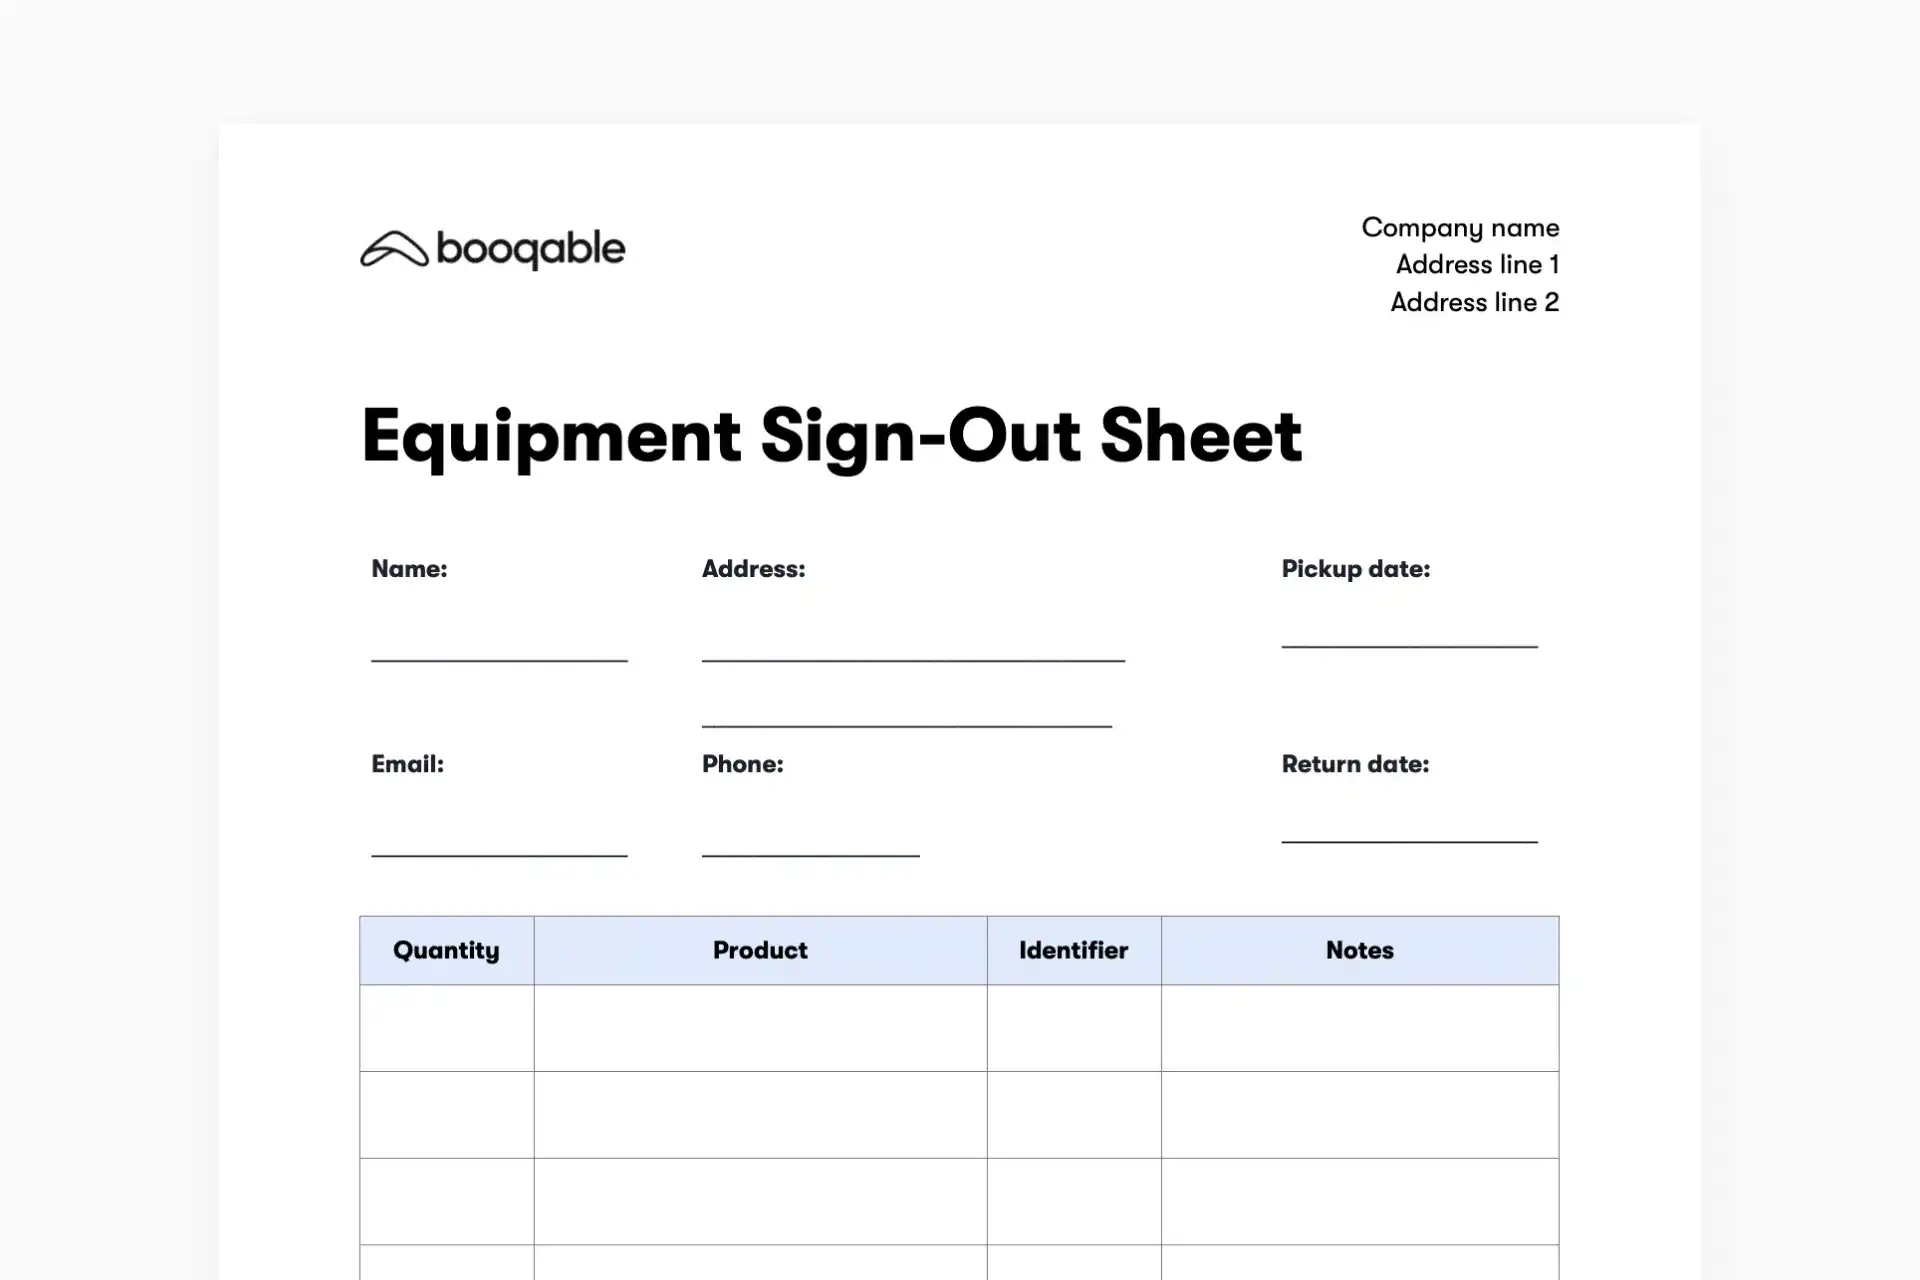 equipment-sign-out-sheets-image-1